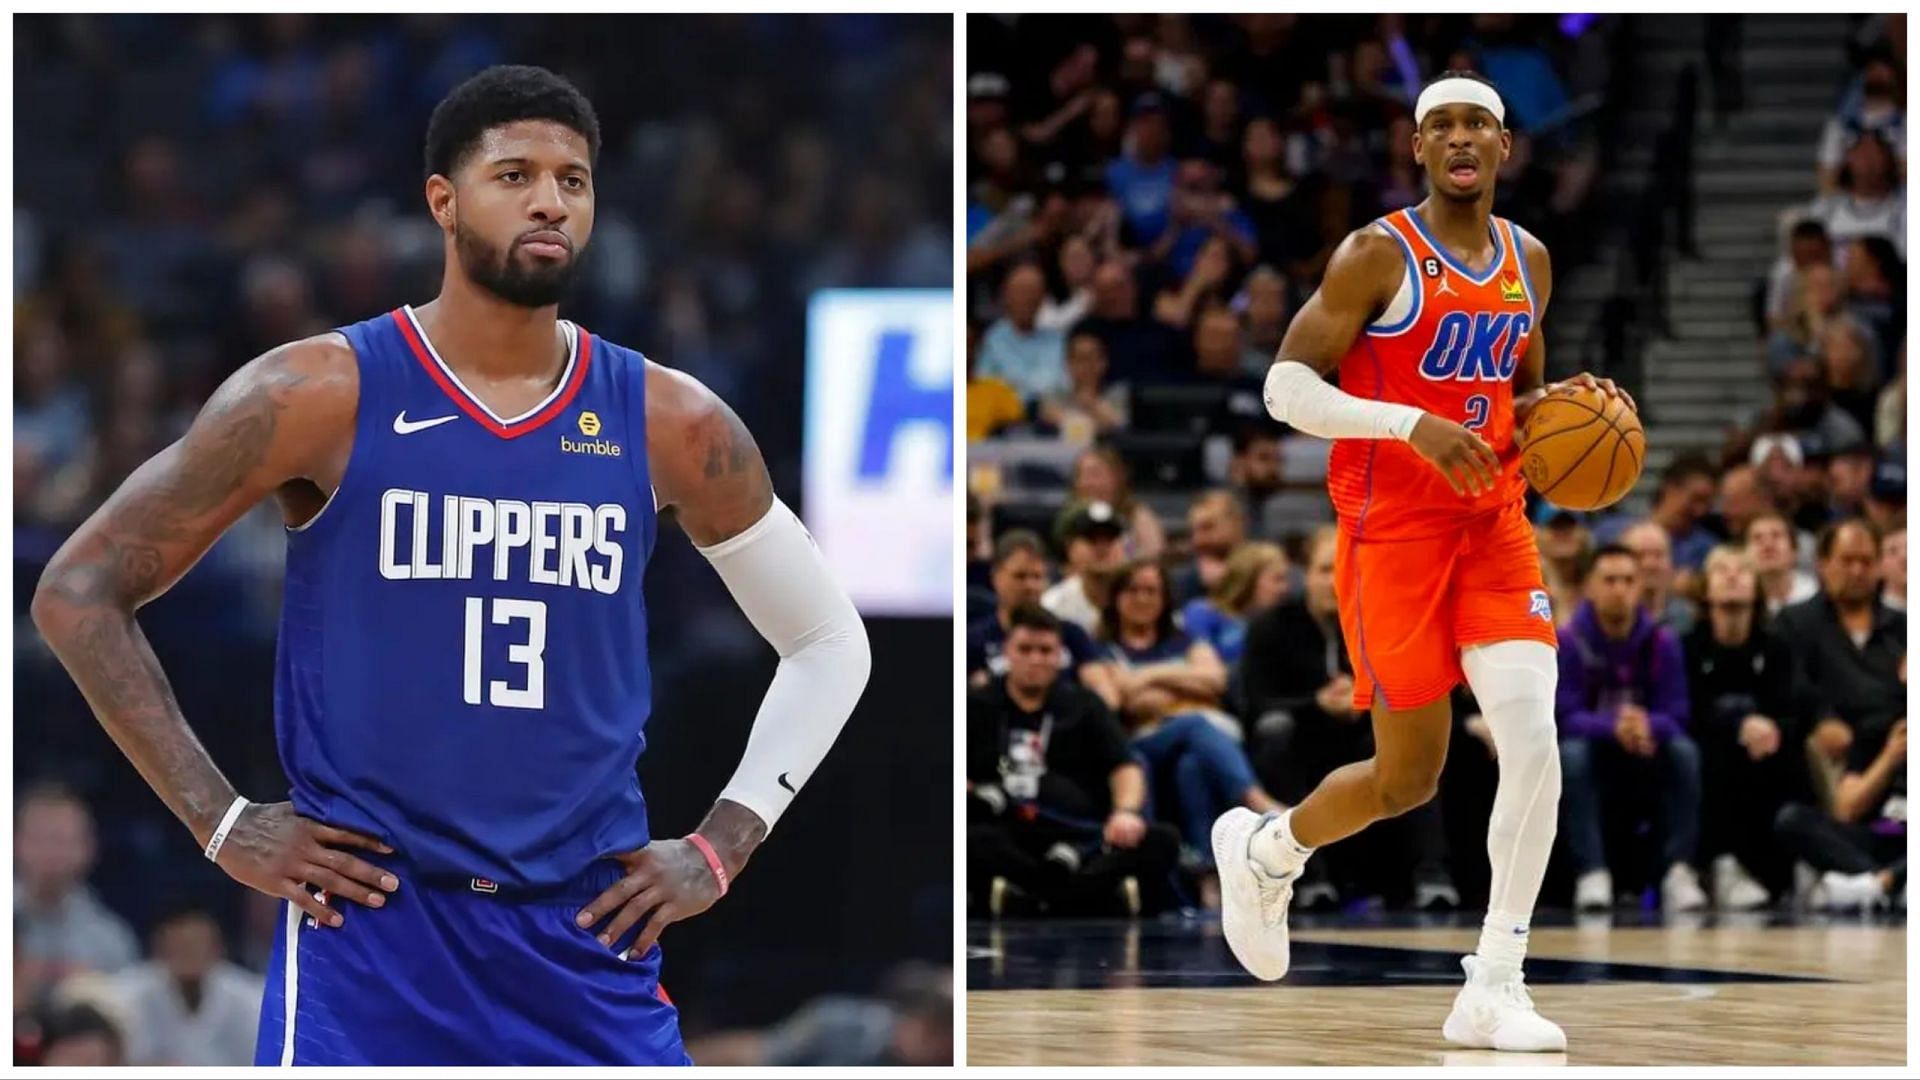 Paul George (left) and Shai Gilgeous-Alexander (right) are among the Top 5 NBA leaders in deflections